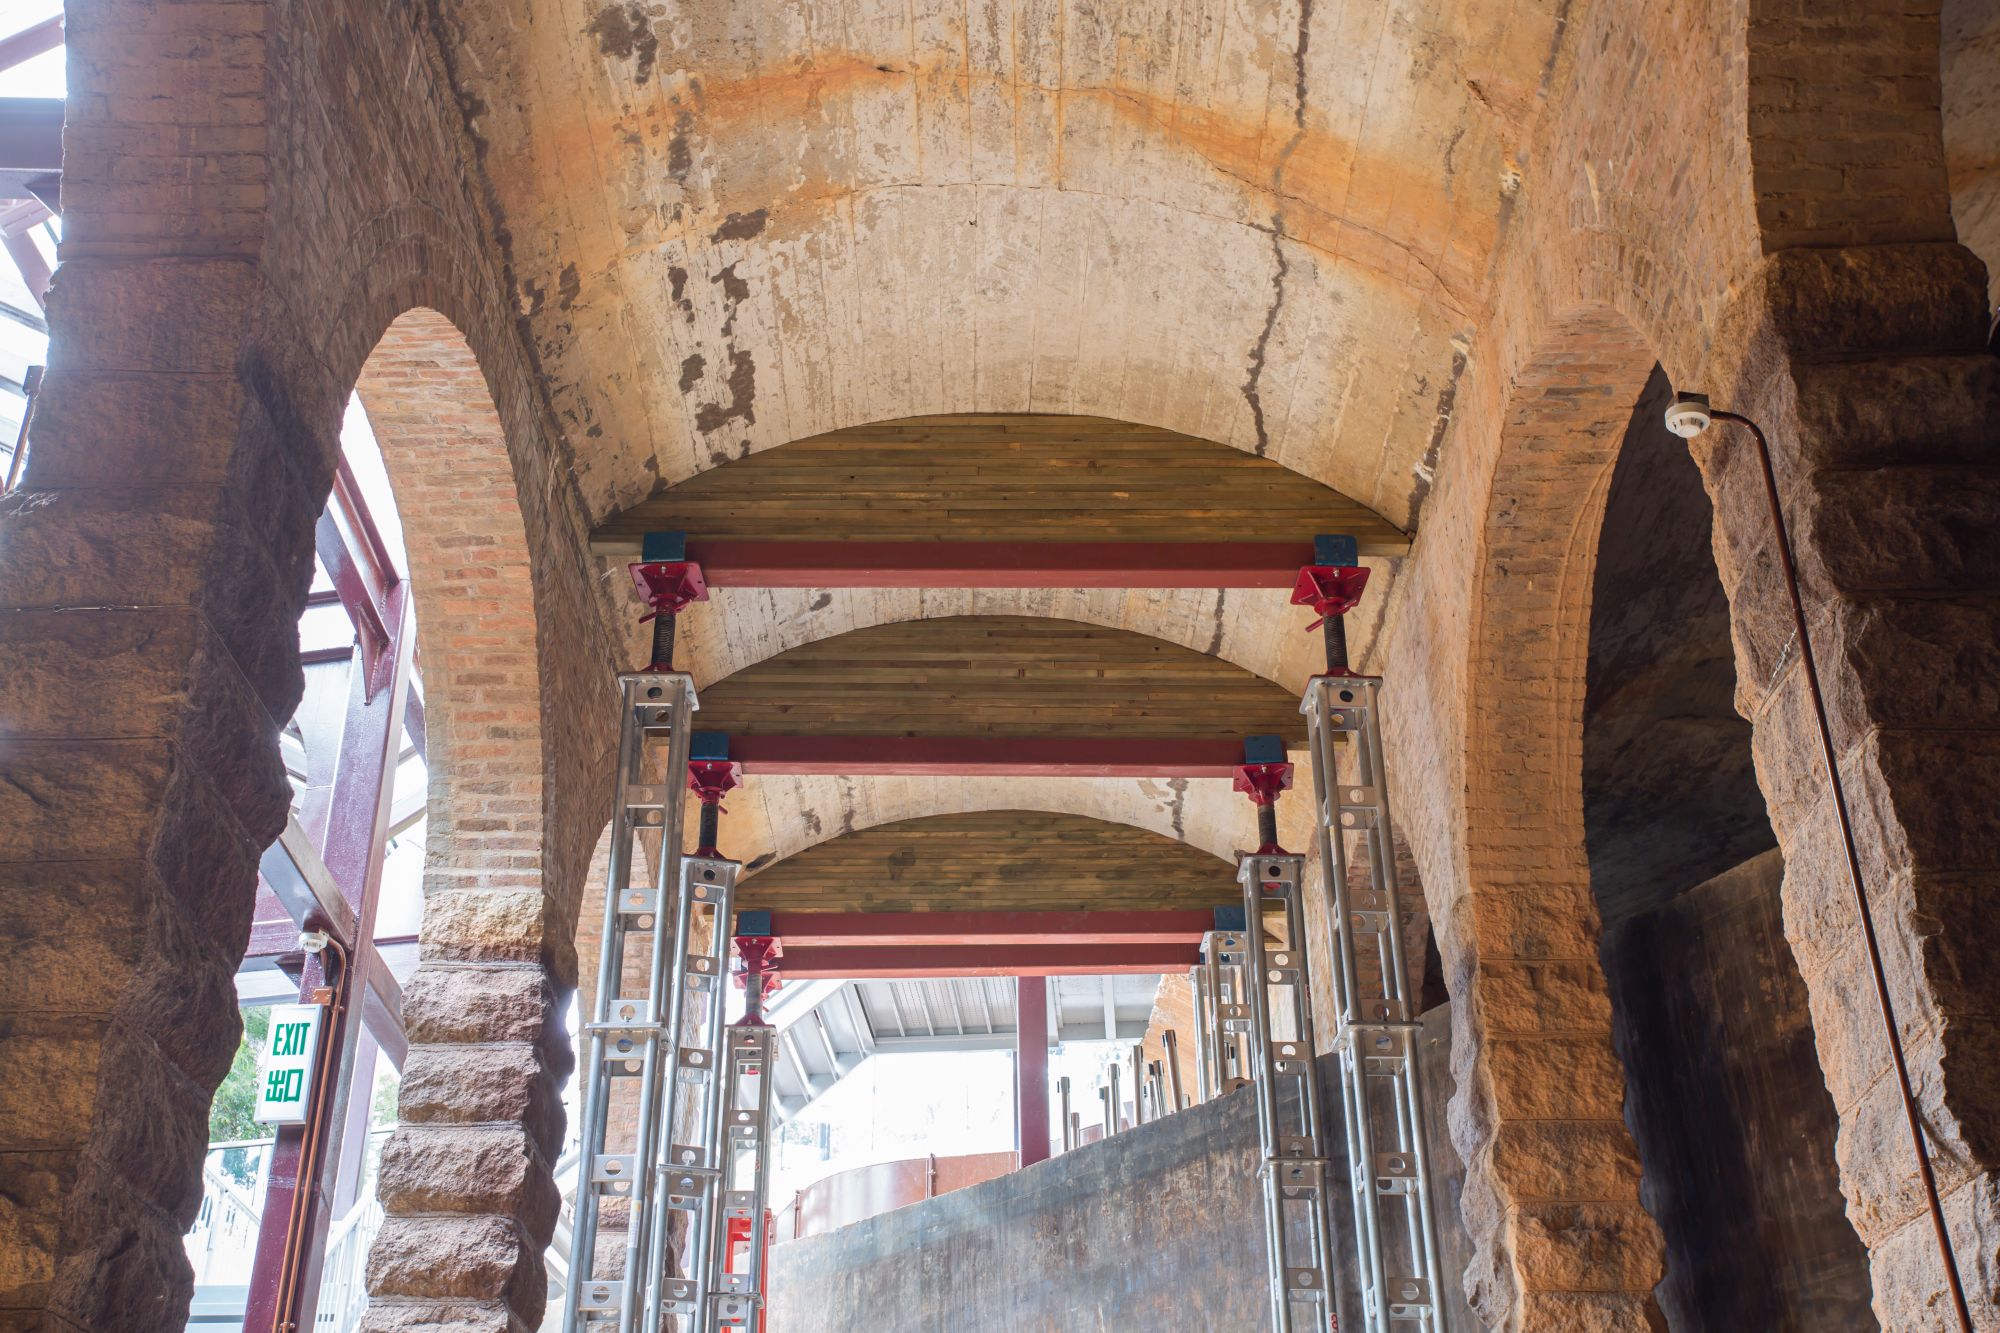 The WSD’s temporary strengthening and tidying works include the installation of temporary bracing to support concrete roof slabs that may have risk of dislocation, and brick arches and other structural parts that show signs of possible danger.